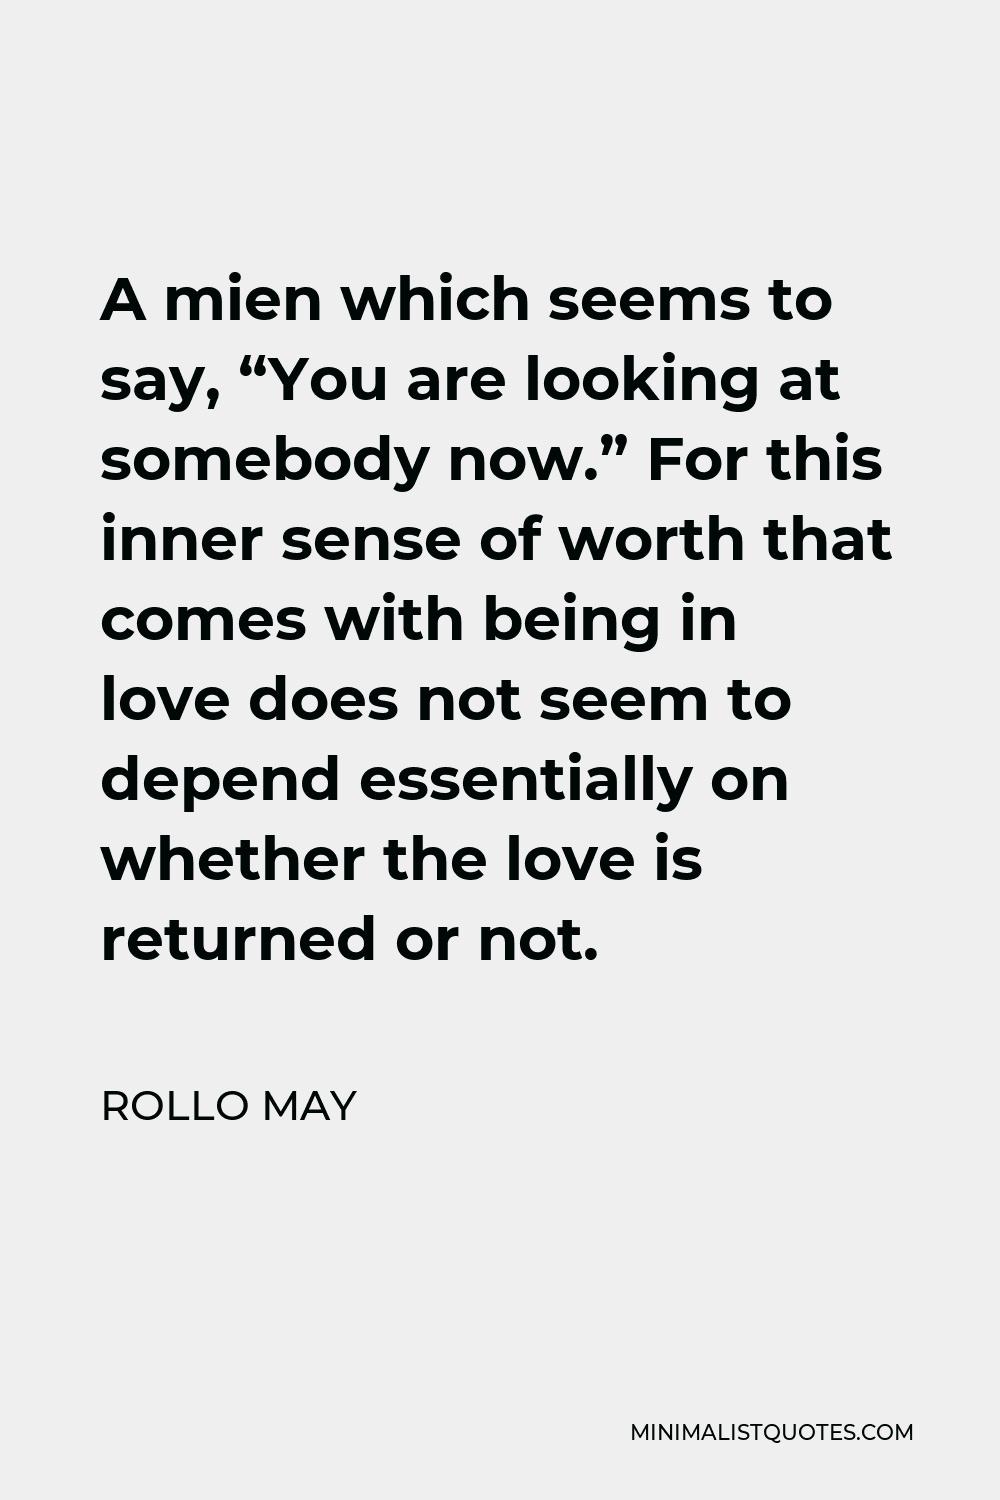 Rollo May Quote - A mien which seems to say, “You are looking at somebody now.” For this inner sense of worth that comes with being in love does not seem to depend essentially on whether the love is returned or not.